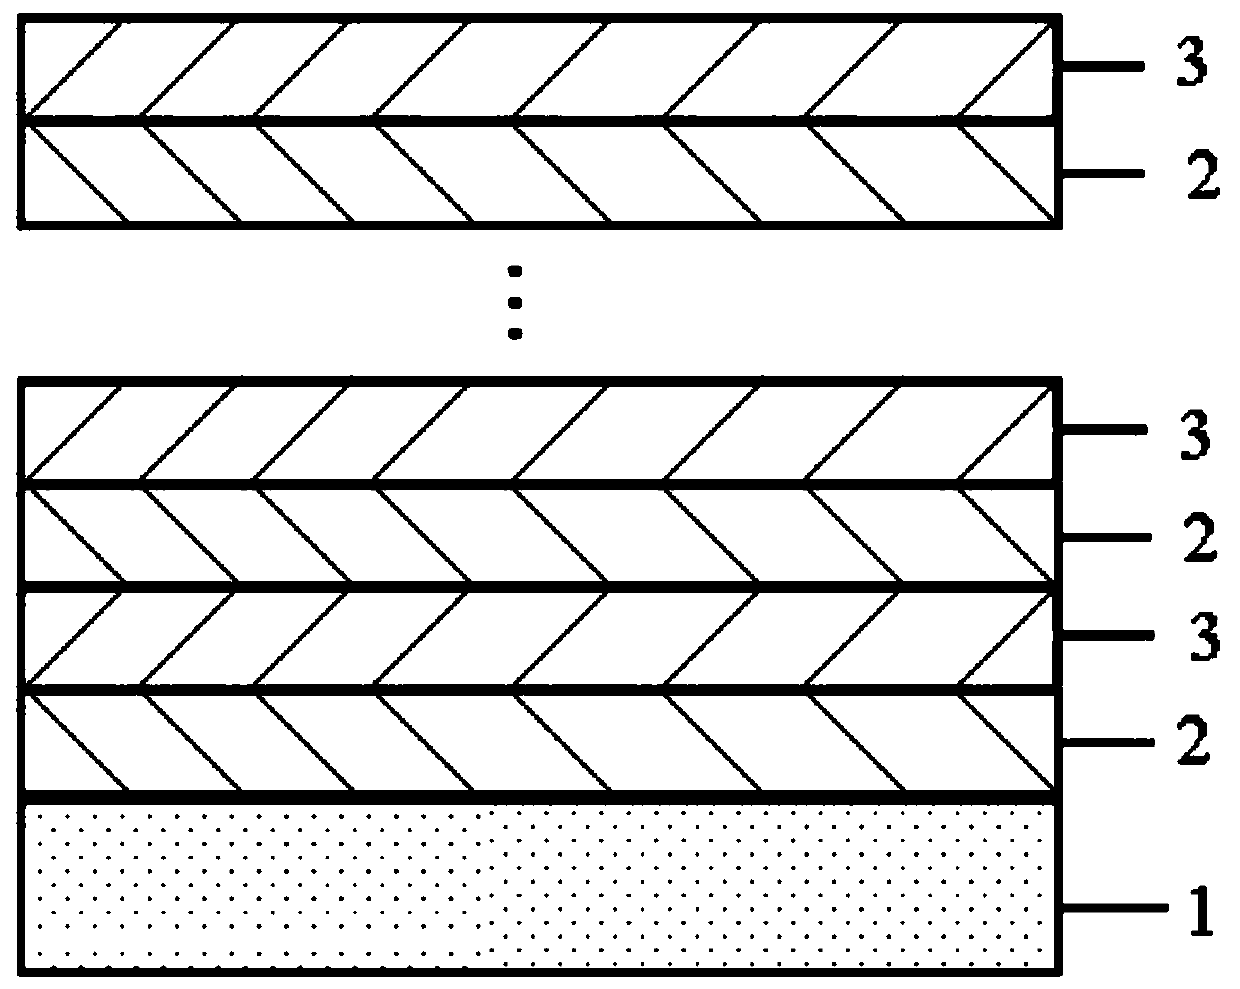 Preparation method of TiAlSi/TiAlSiN multilayer alternating coating with high abrasion resistance